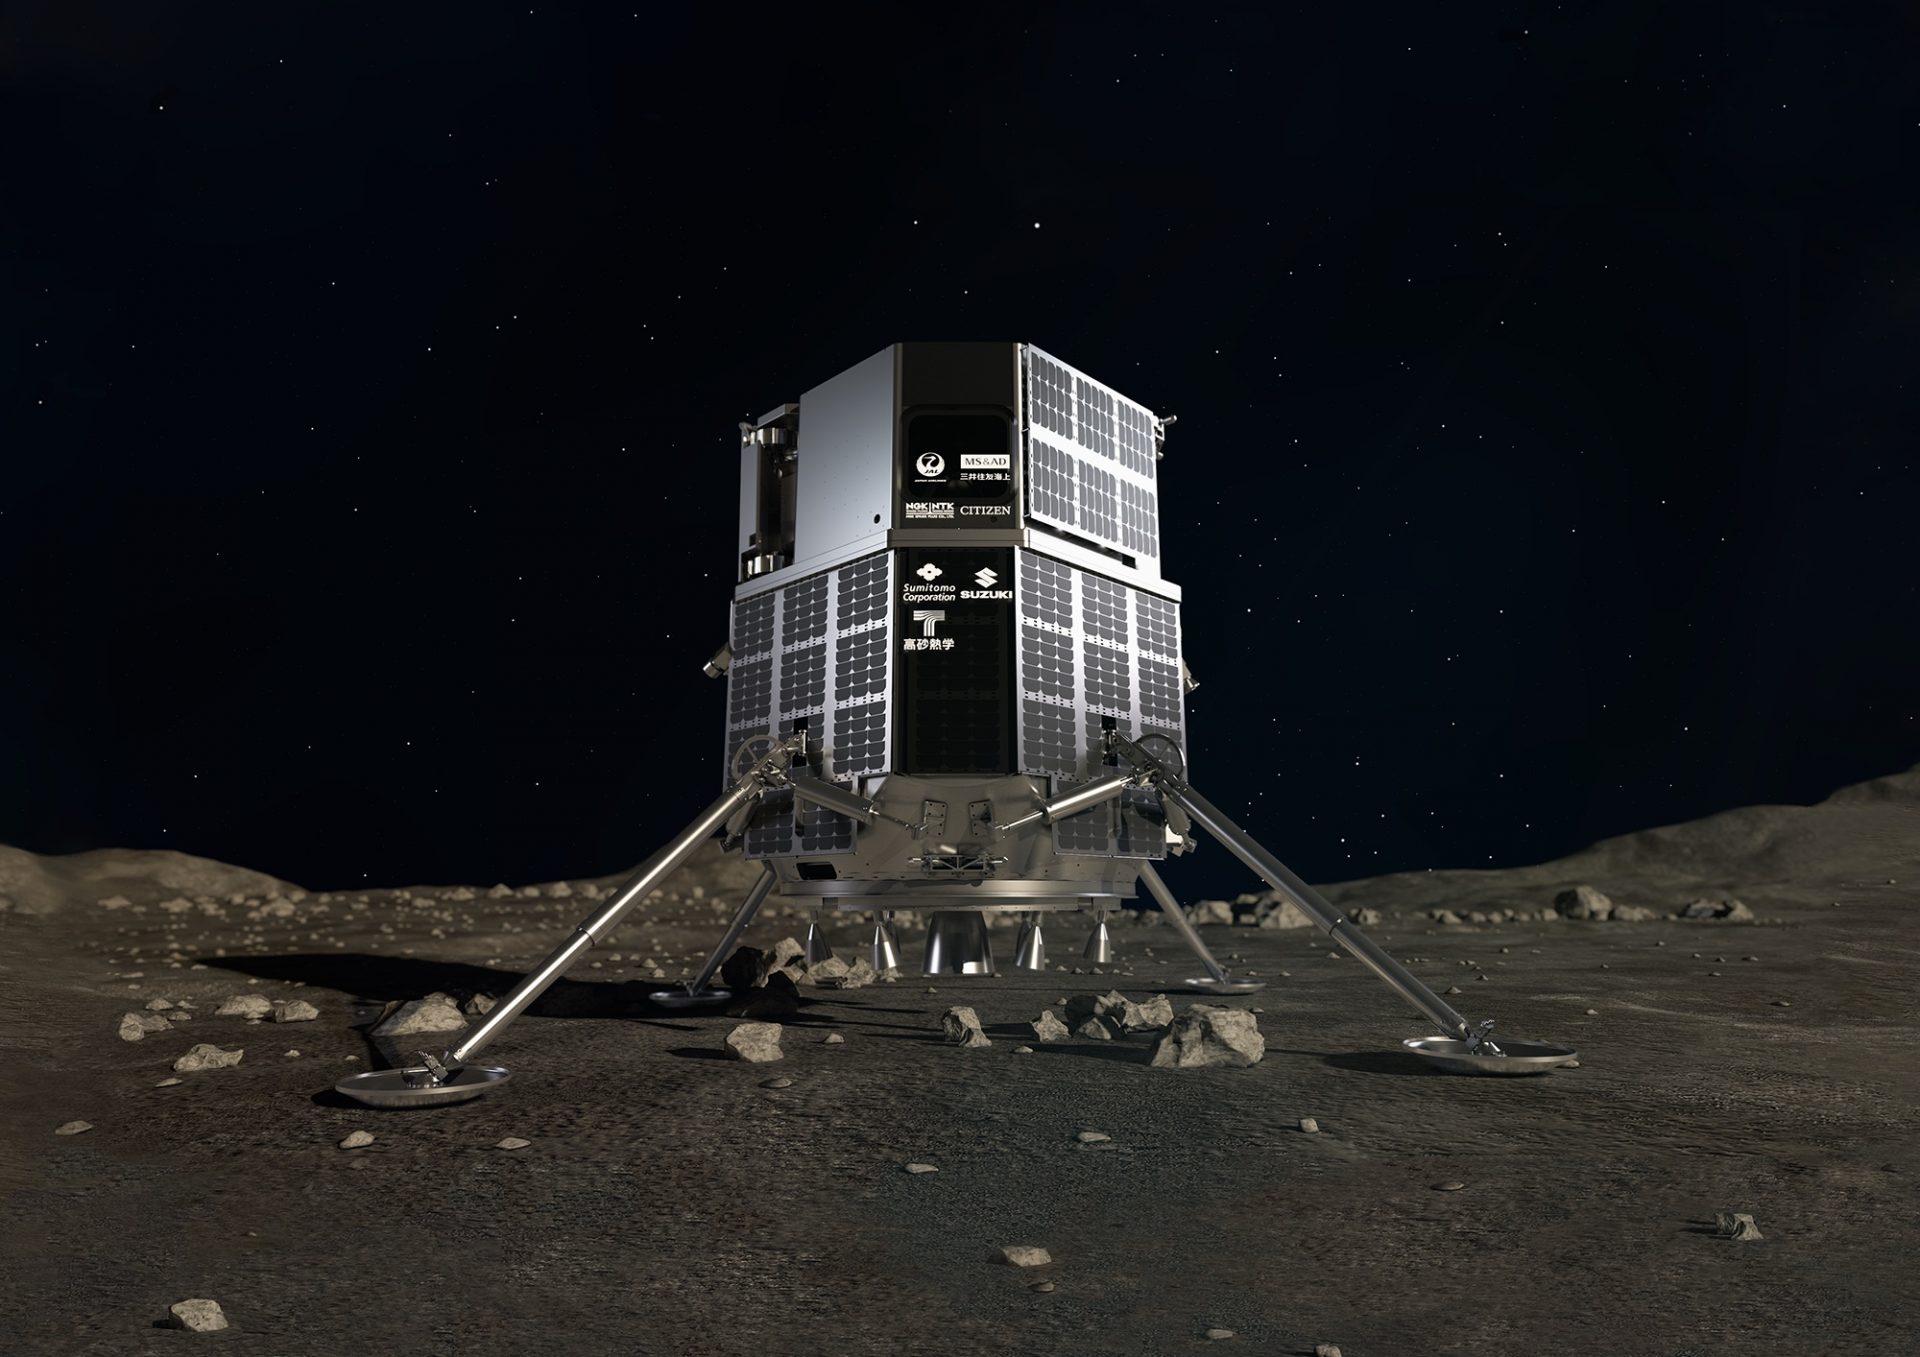 Japanese ispace lander to elevate UAE moon rover to lunar surface in 2022